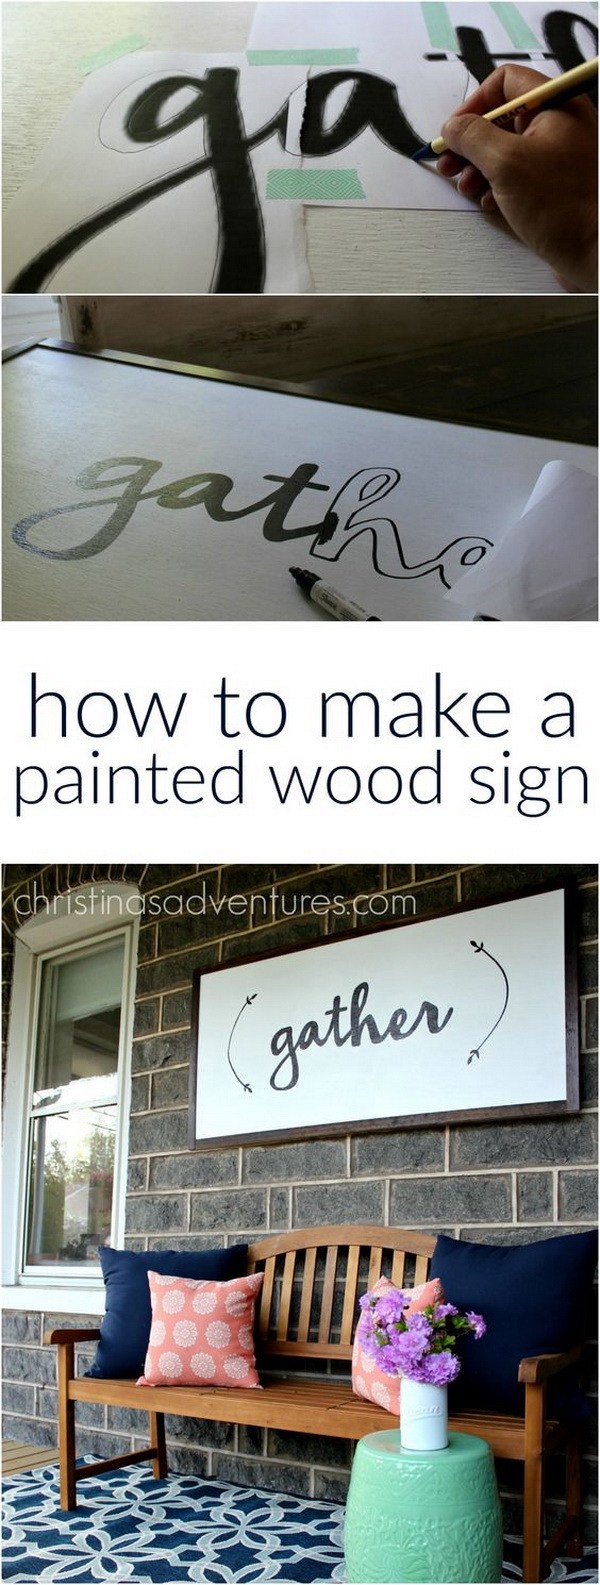 DIY Large Painted Wooden Sign: This painted wood sign is very easy to make. No special tools required and makes a statement to your home decor.